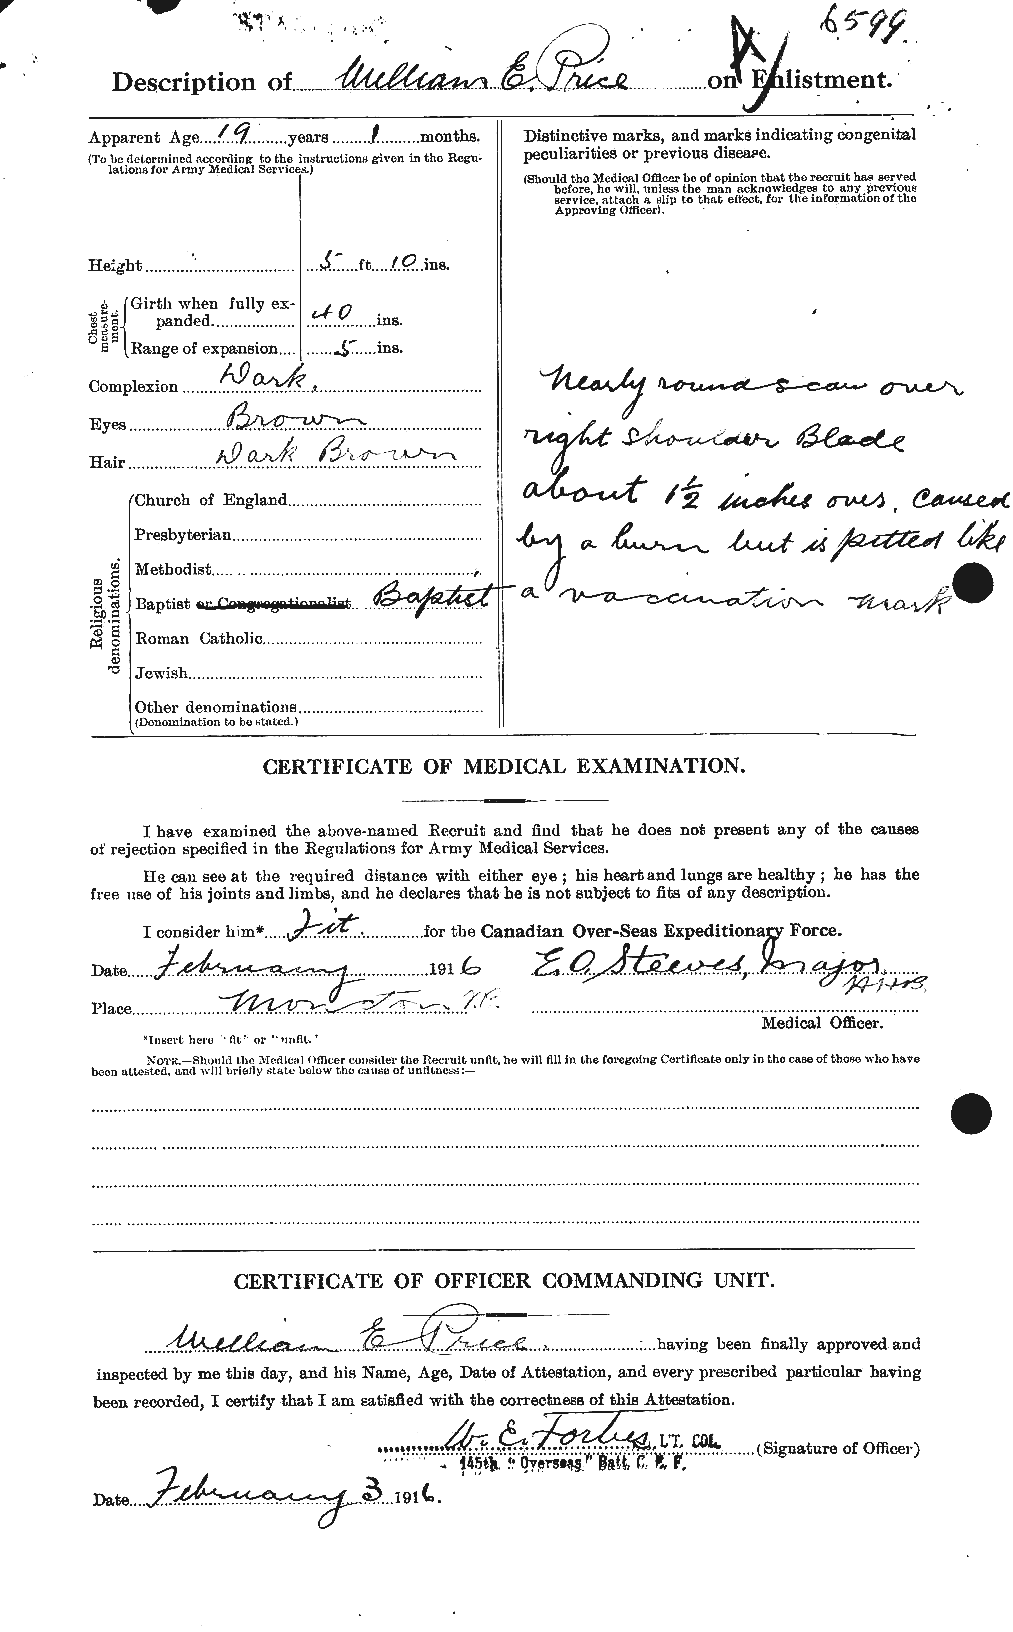 Personnel Records of the First World War - CEF 587434b